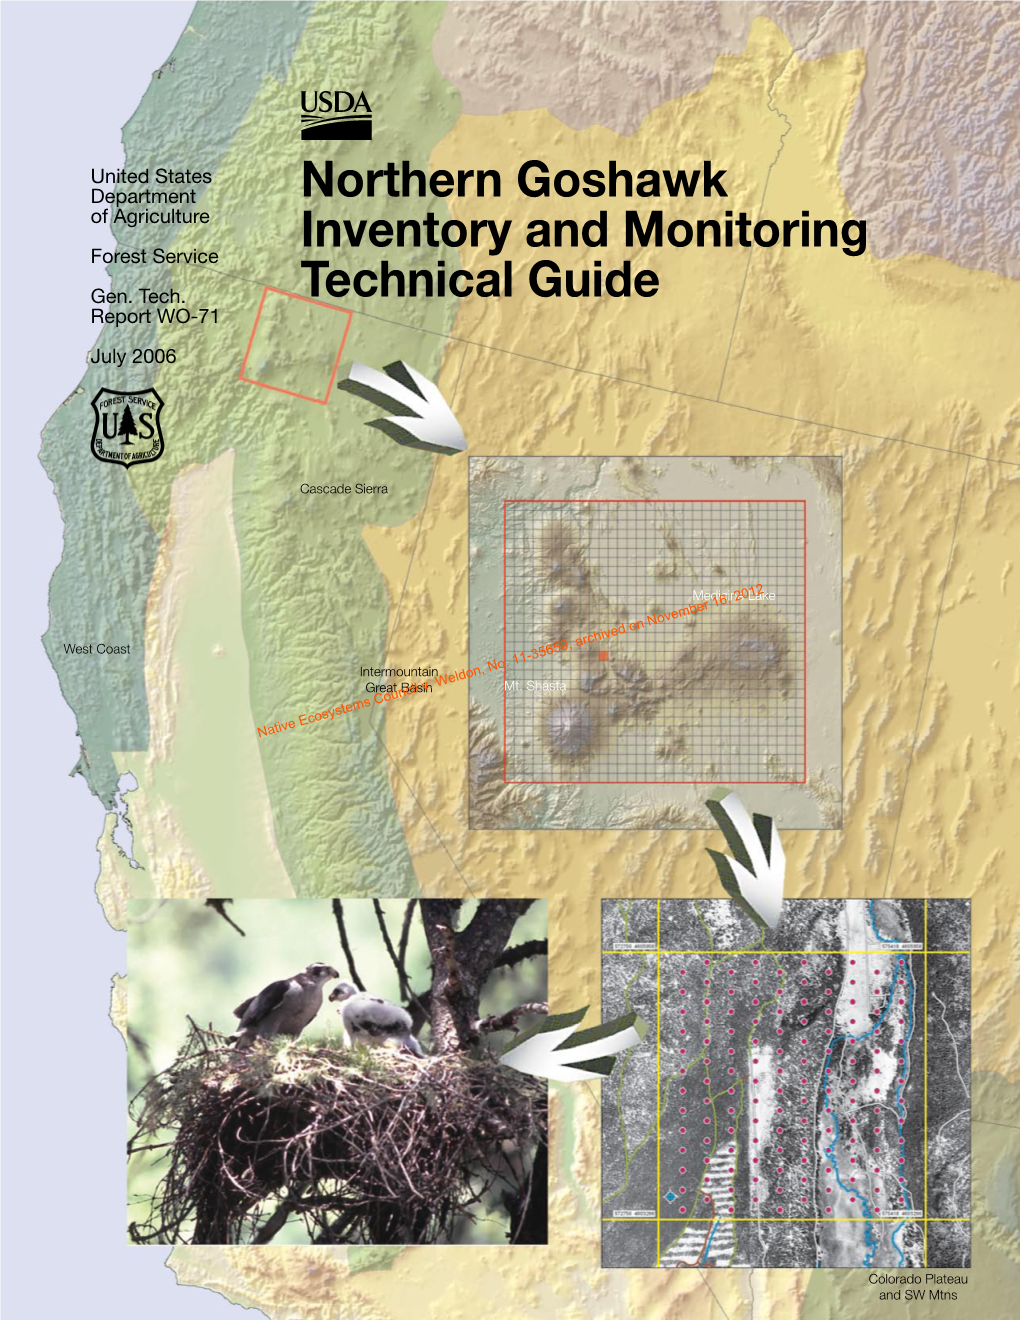 Northern Goshawk Inventory and Monitoring Technical Guide